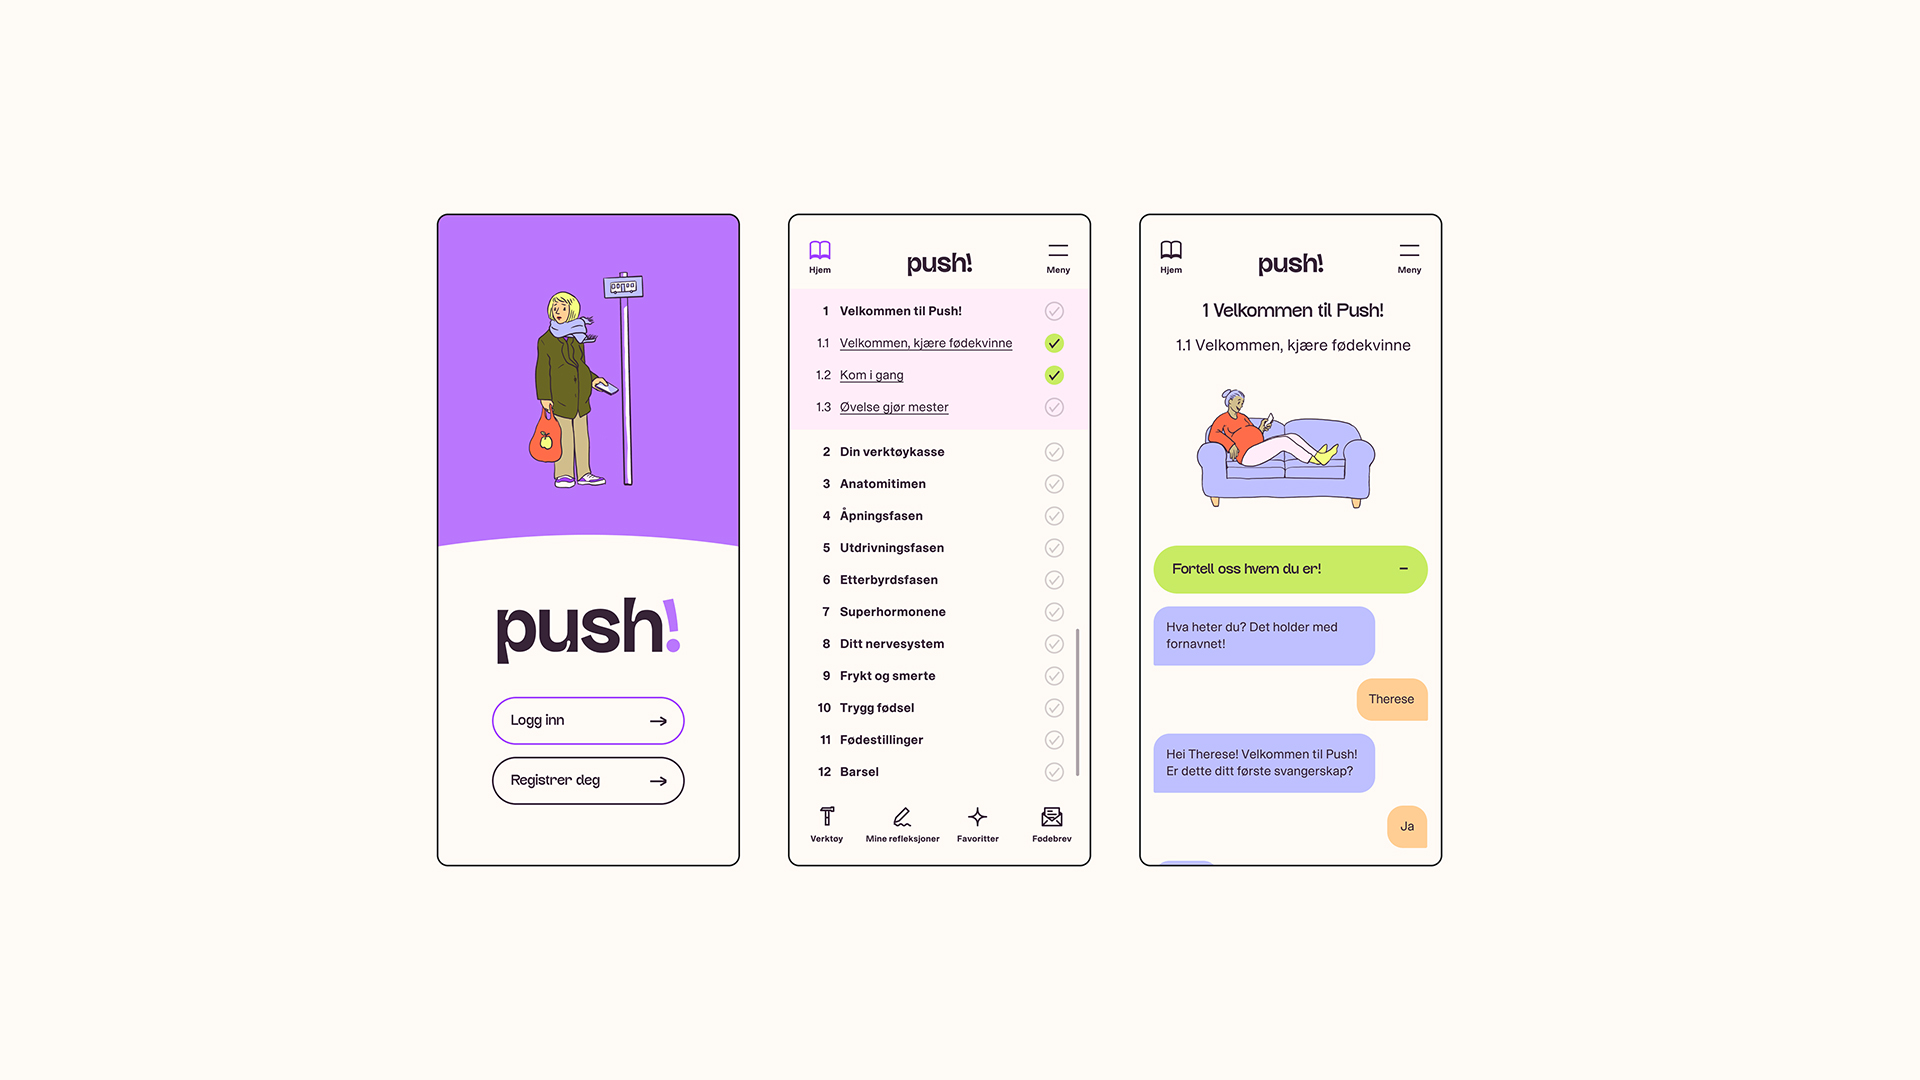 Three screenshots from the Push! mobile app.